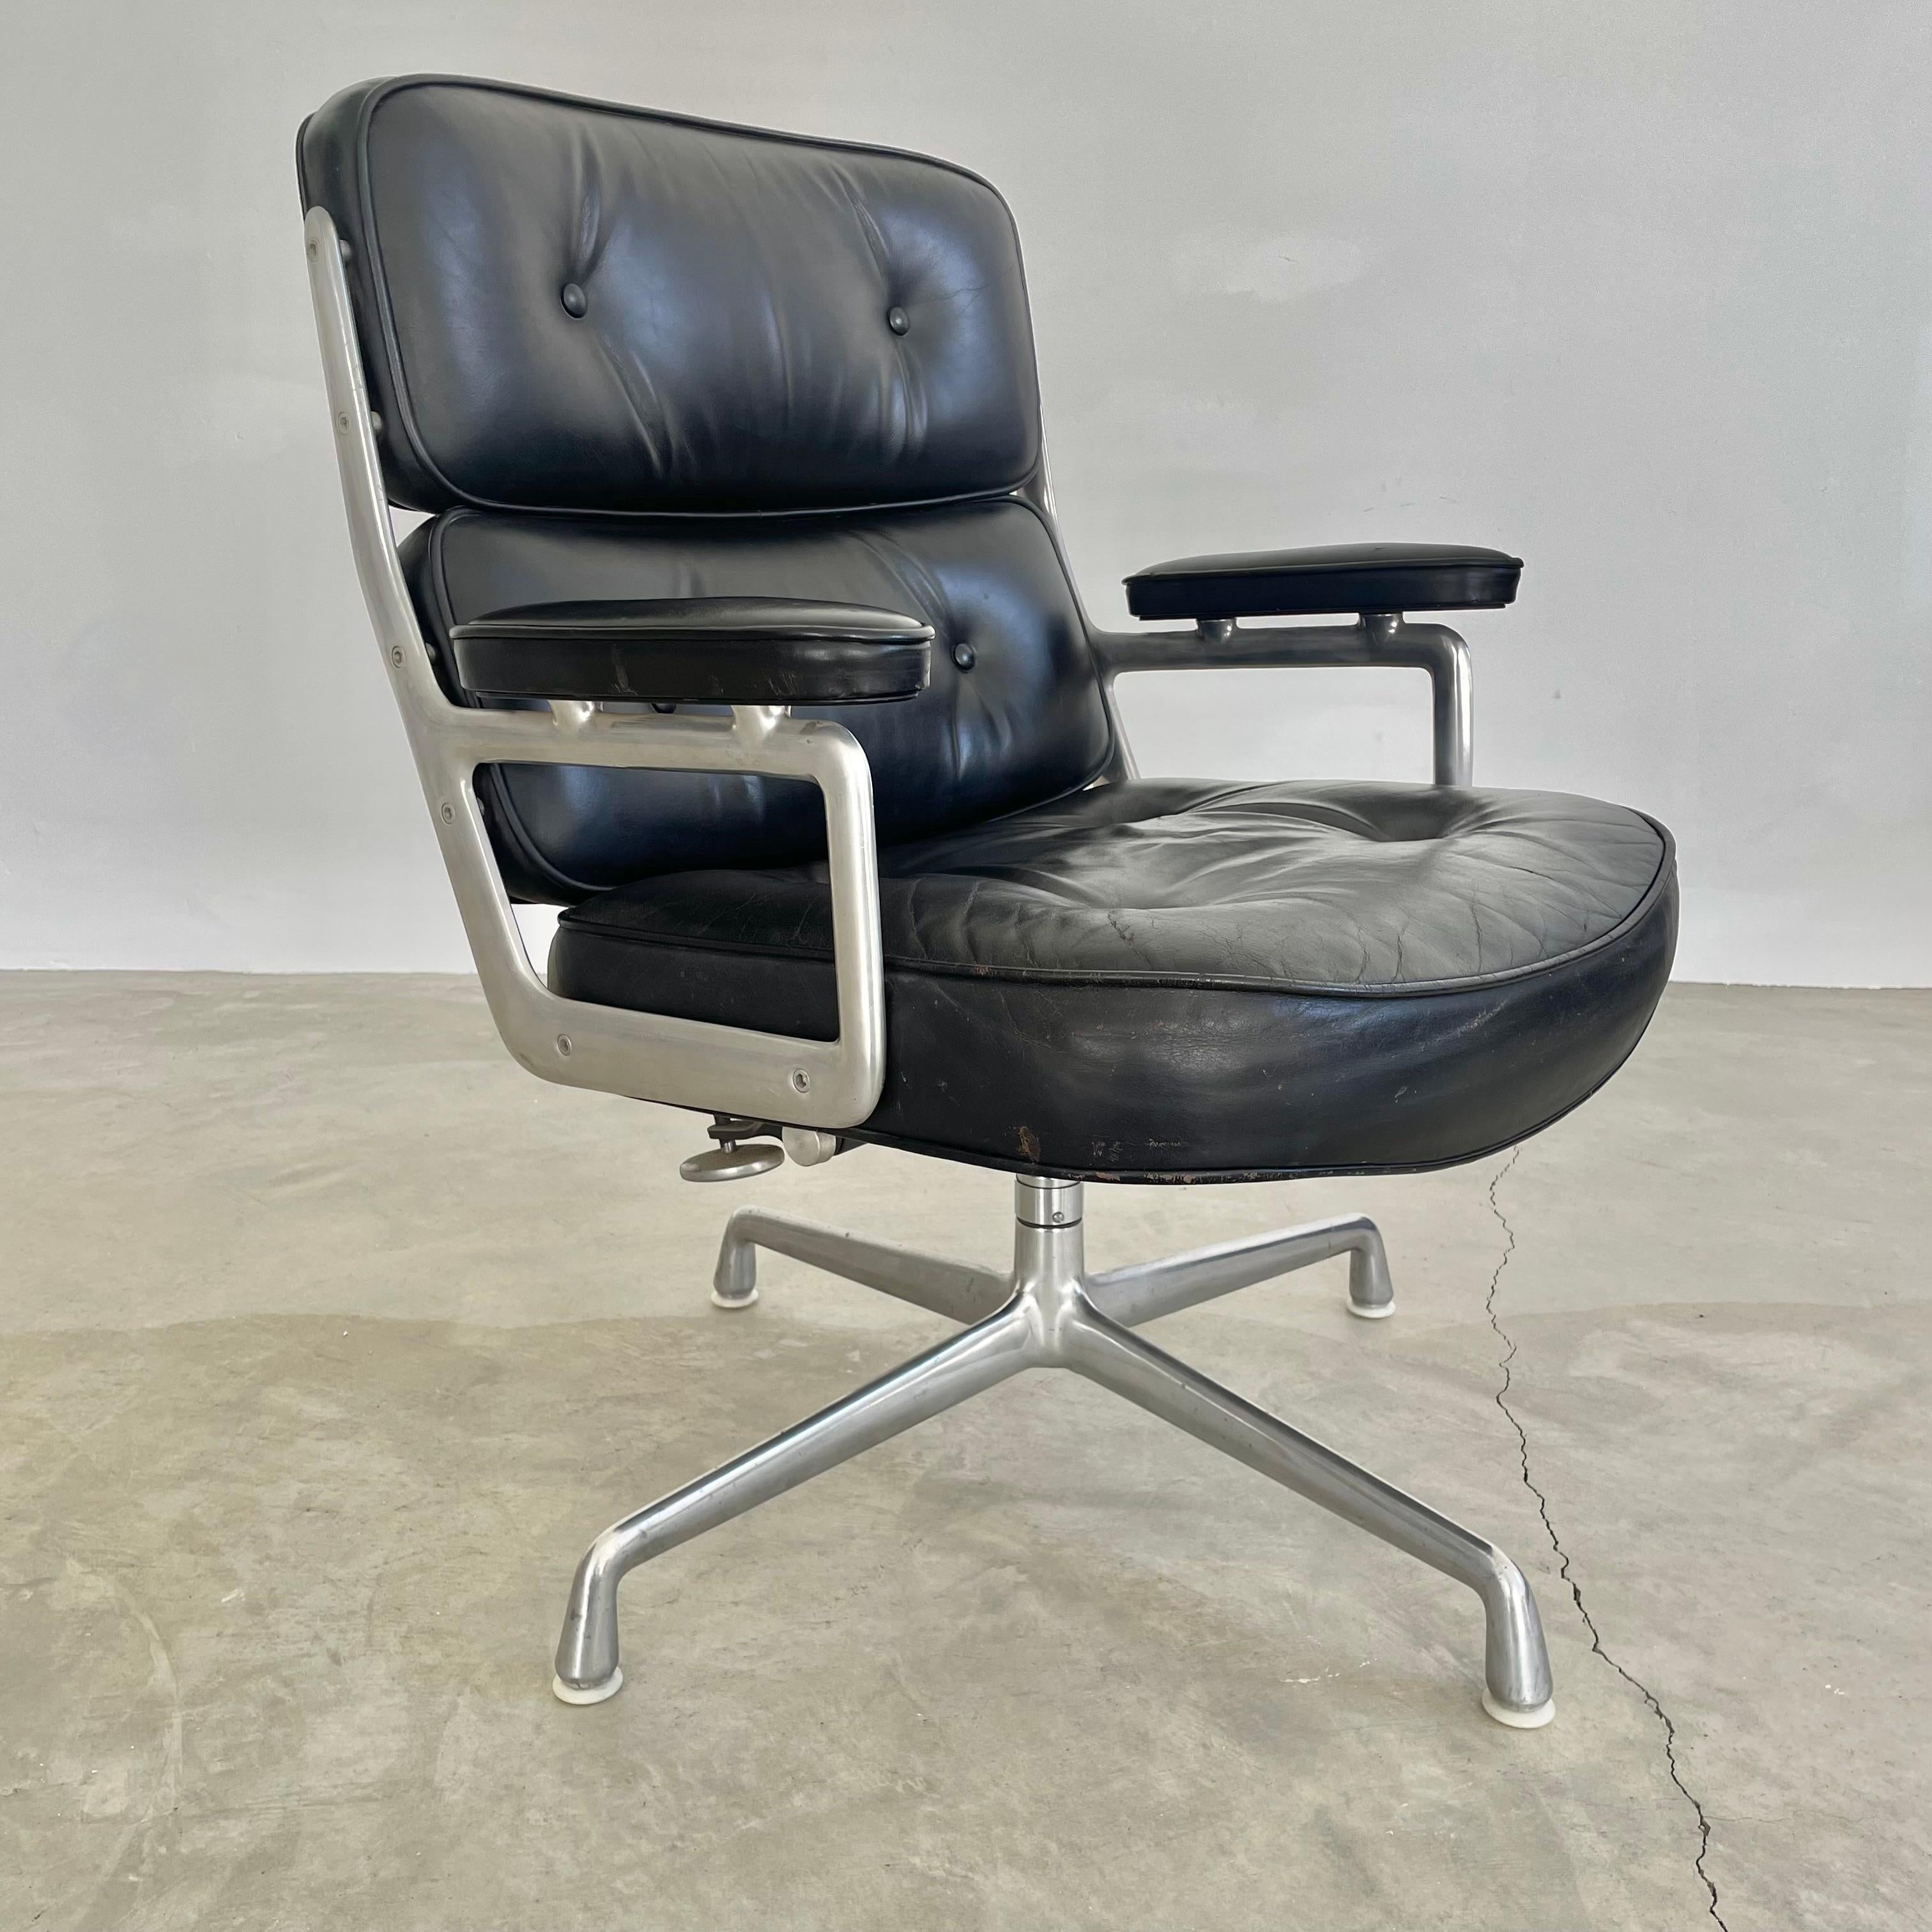 Mid-Century Modern Eames Time Life Chair in Black Leather for Herman Miller, 1990s USA